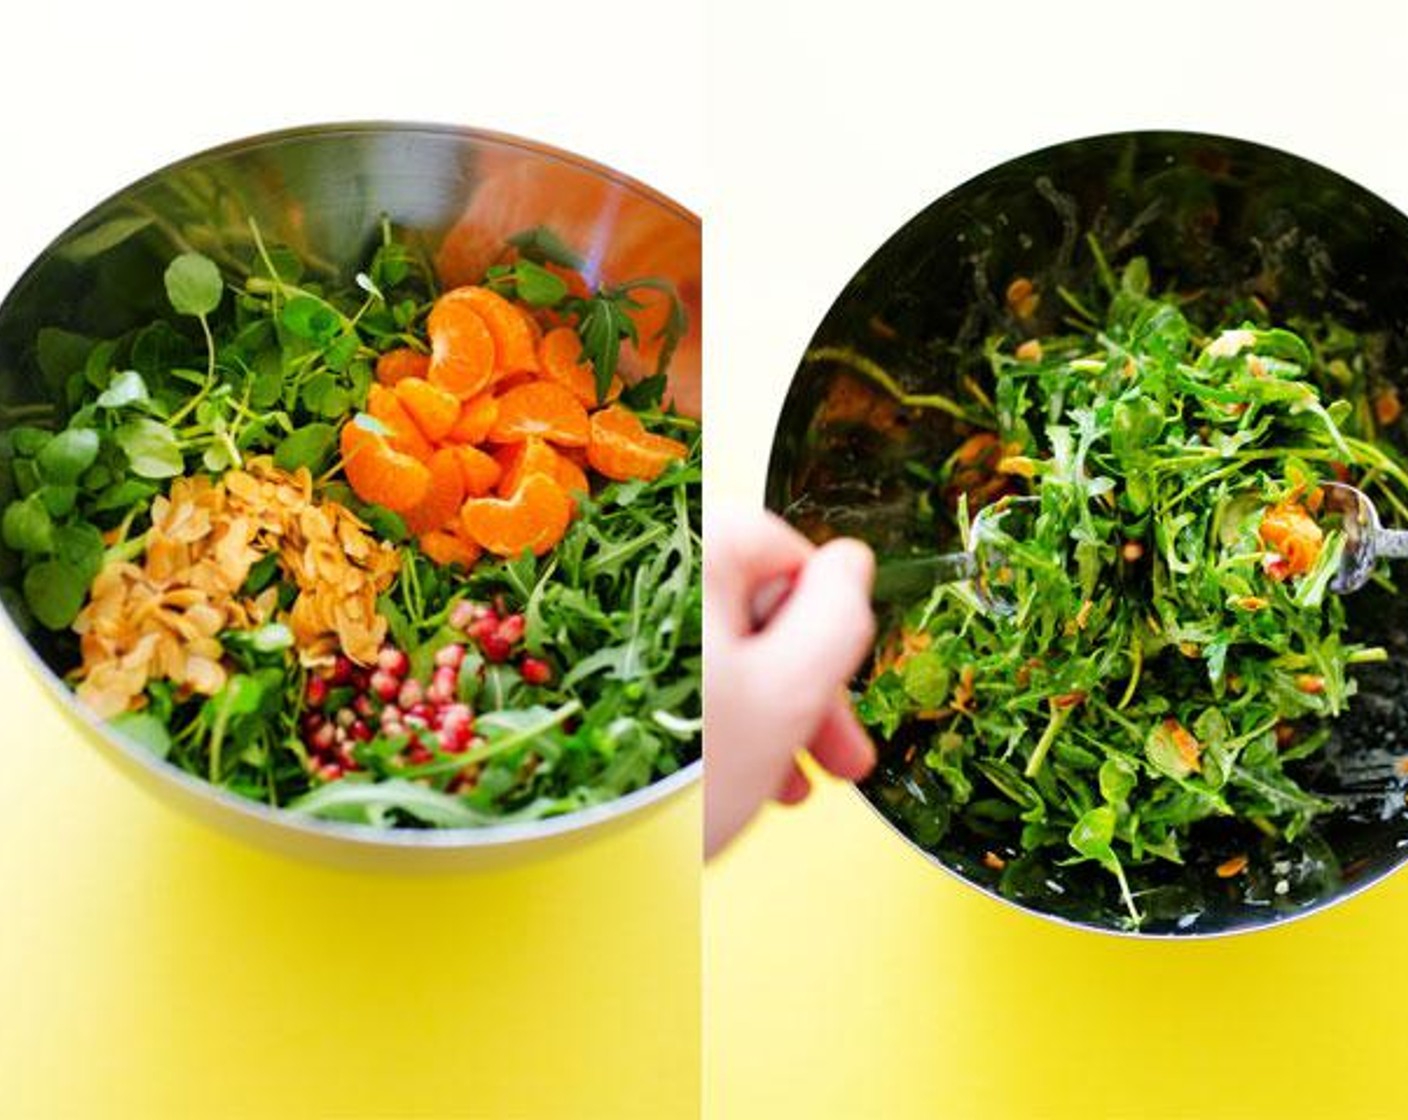 step 2 Toss all salad ingredients together in a large bowl. Salad ingredients include Watercress (3 cups), Arugula (3 cups), Clementine (1 cup), Pomegranate Seeds (1/4 cup) and Almonds (1/4 cup).